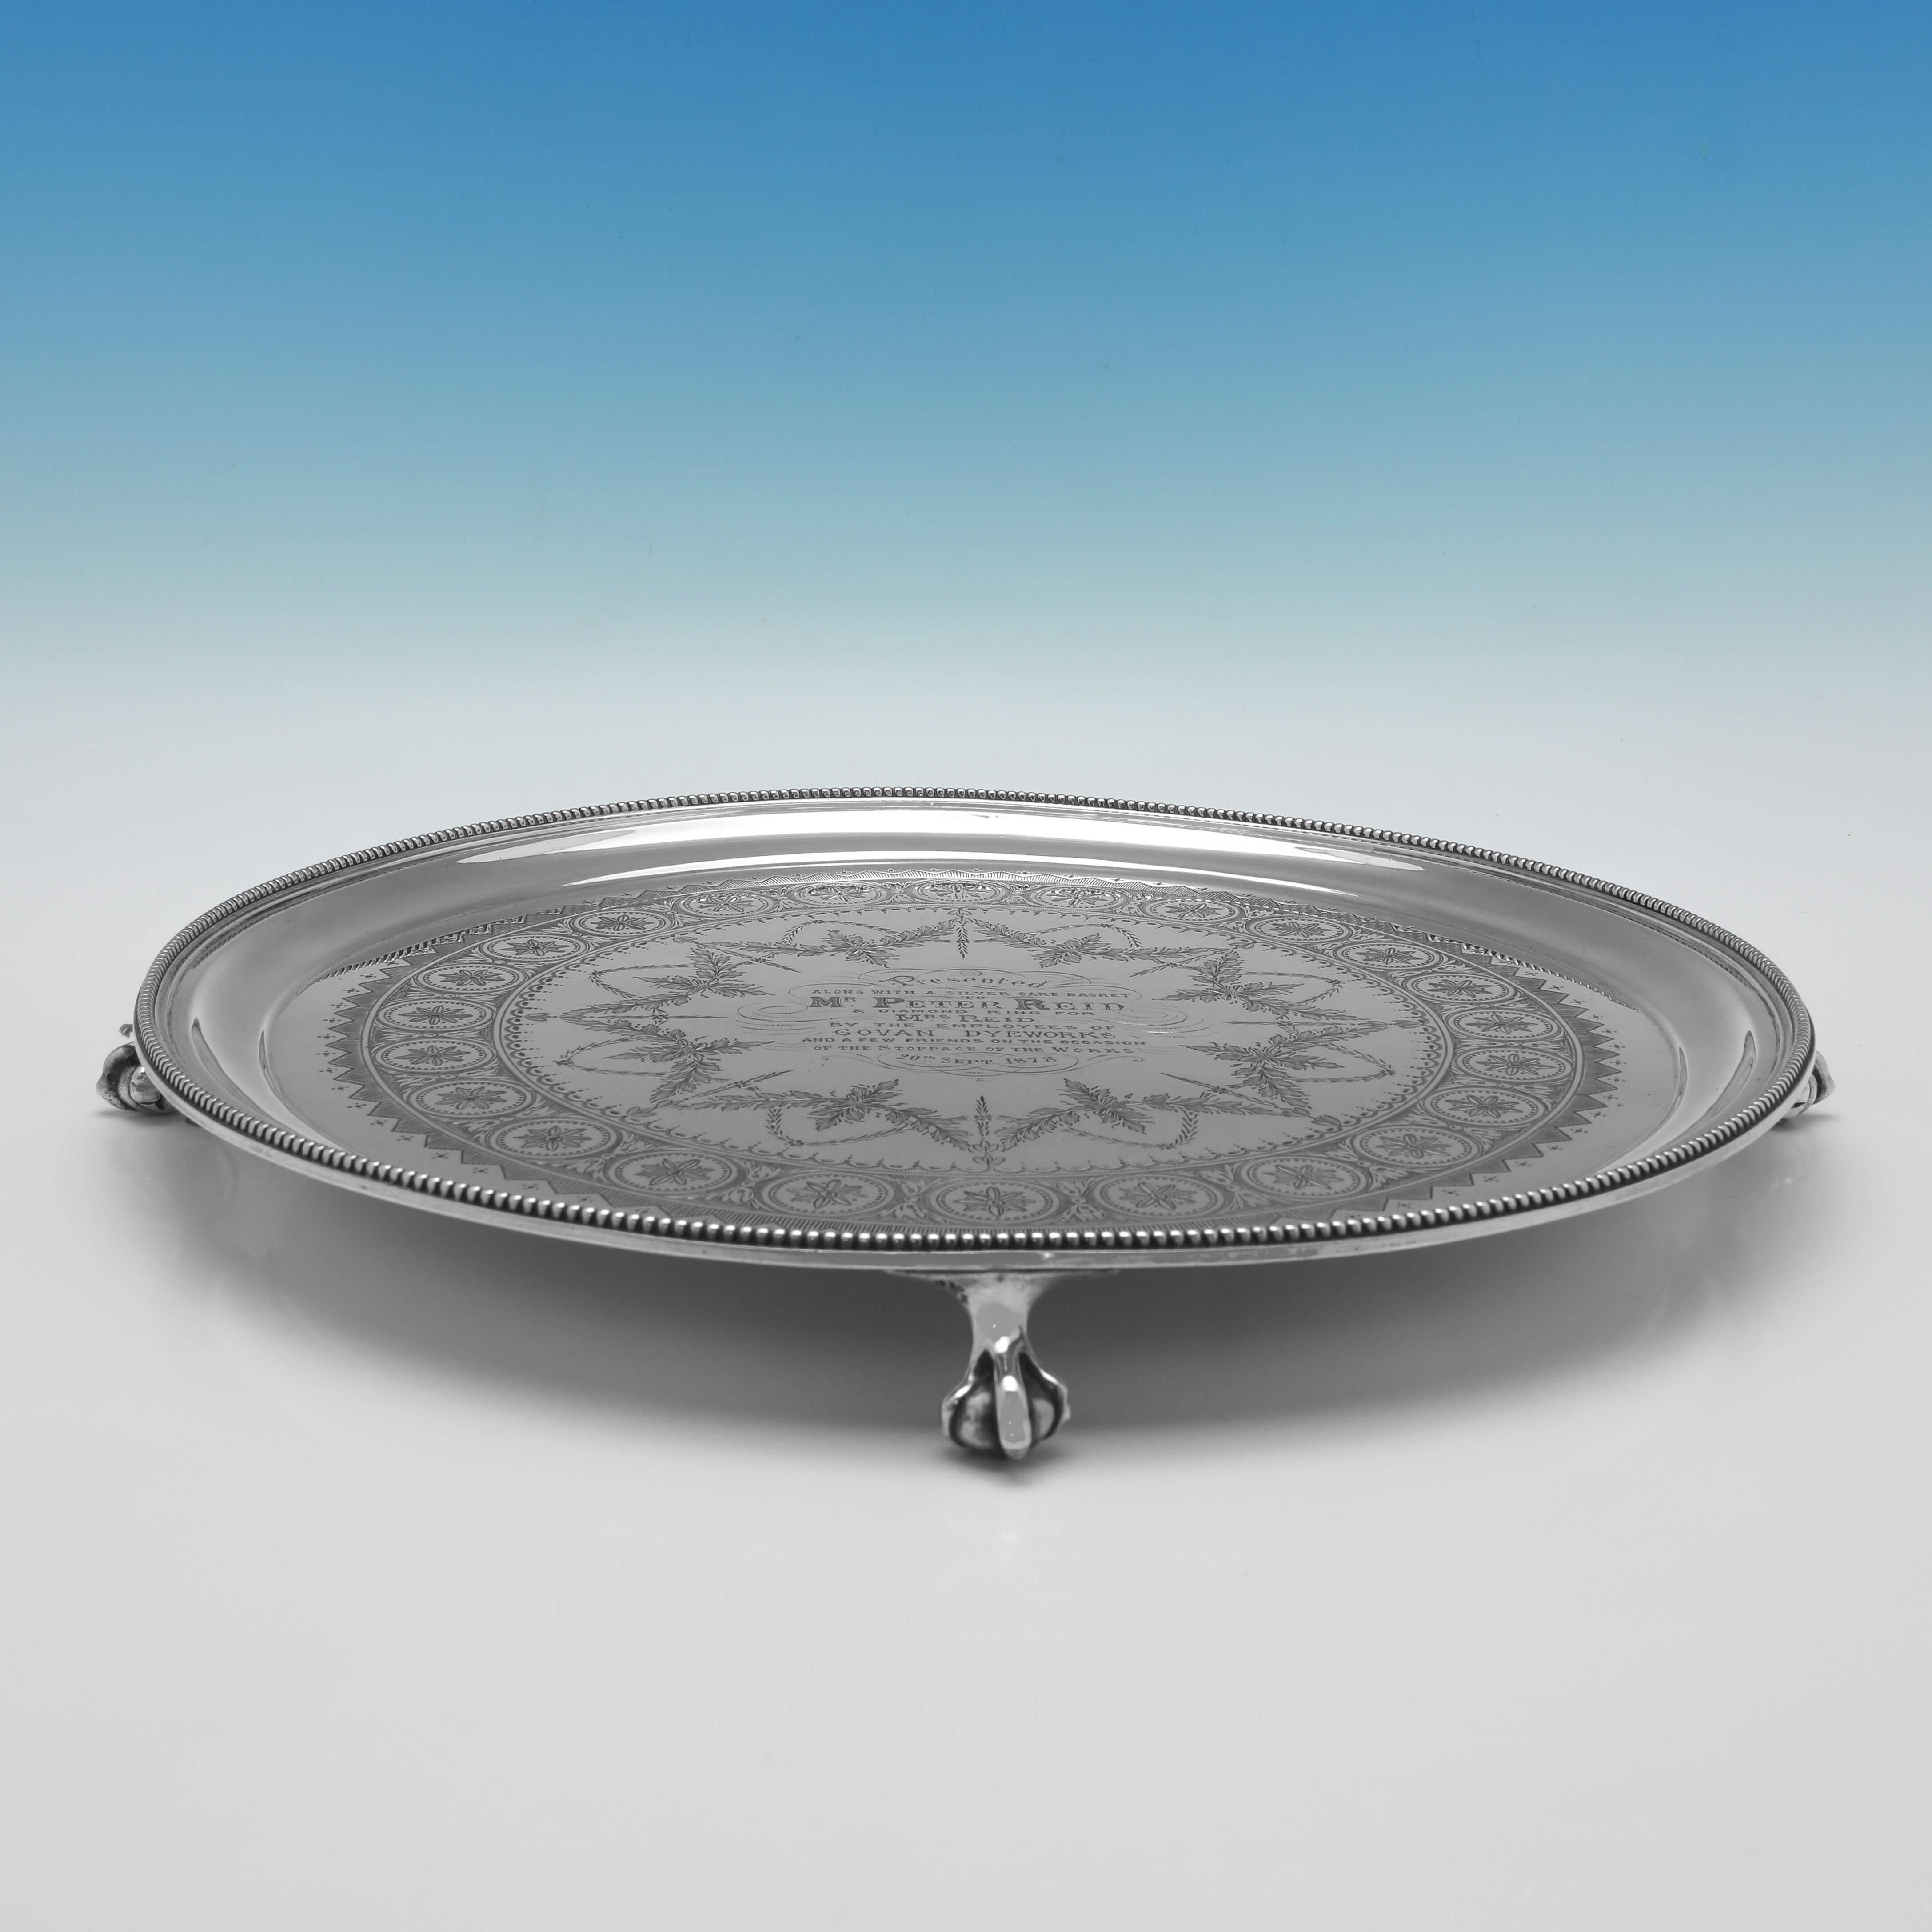 Hallmarked in London in 1875 by Henry Wilkinson & Co., this attractive, Antique Sterling Silver Salver, stands on ball and claw feet, and features a bead border, engraved decoration, and an engraved presentation inscription to the centre. 

The